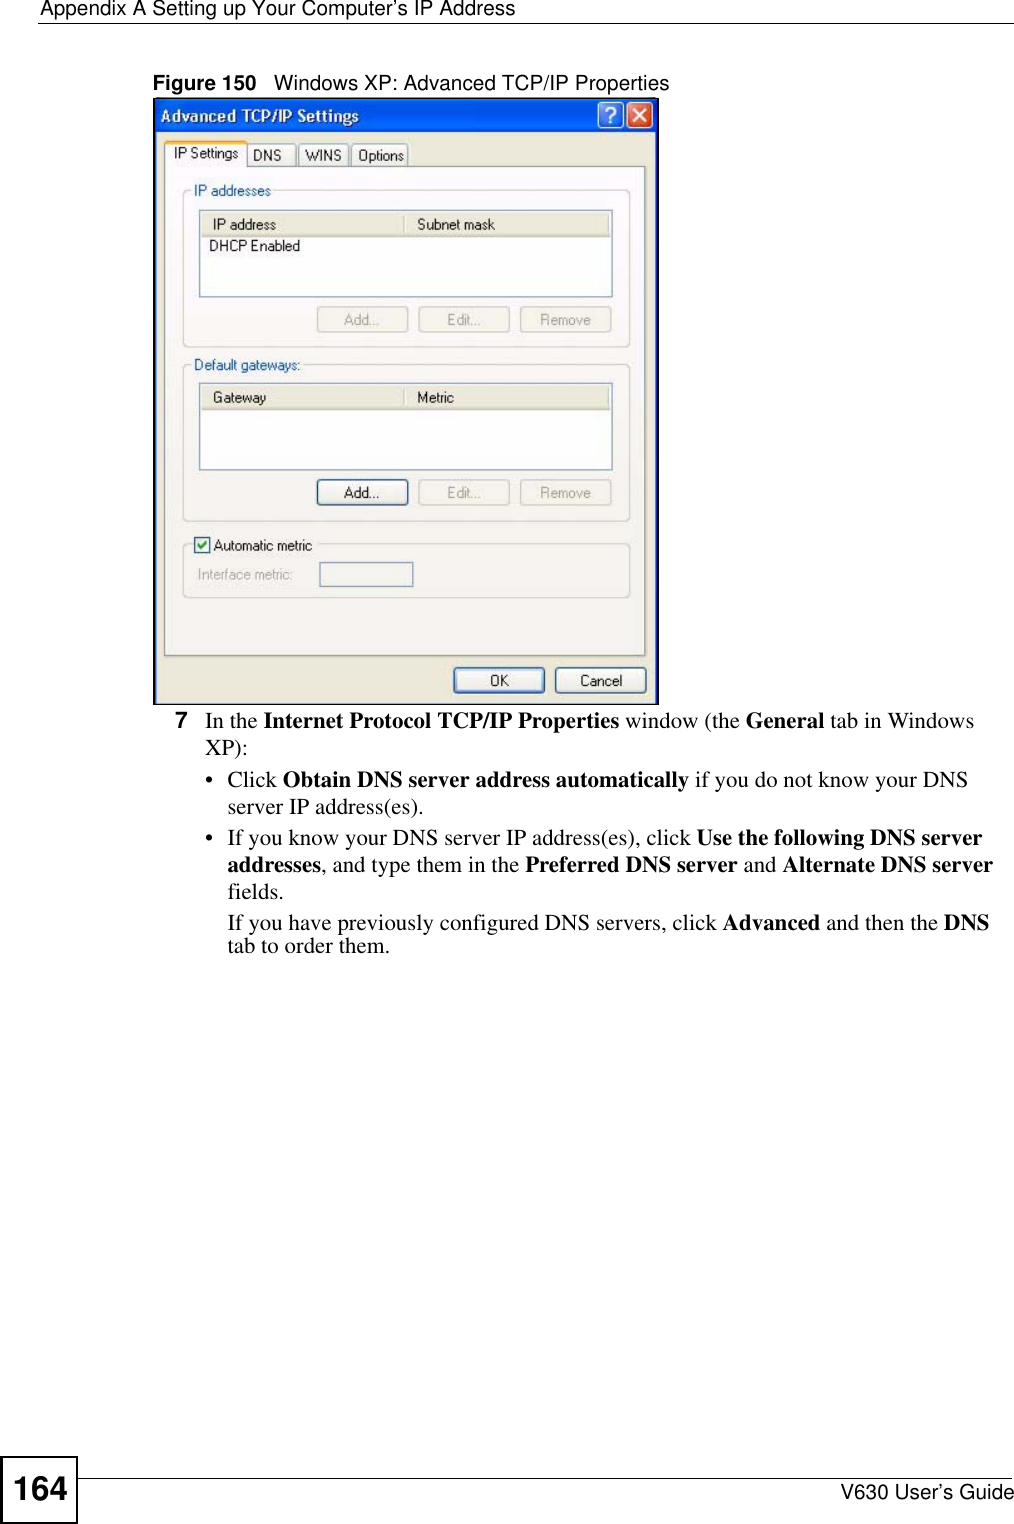 Appendix A Setting up Your Computer’s IP AddressV630 User’s Guide164Figure 150   Windows XP: Advanced TCP/IP Properties7In the Internet Protocol TCP/IP Properties window (the General tab in Windows XP):• Click Obtain DNS server address automatically if you do not know your DNS server IP address(es).• If you know your DNS server IP address(es), click Use the following DNS server addresses, and type them in the Preferred DNS server and Alternate DNS server fields. If you have previously configured DNS servers, click Advanced and then the DNS tab to order them.